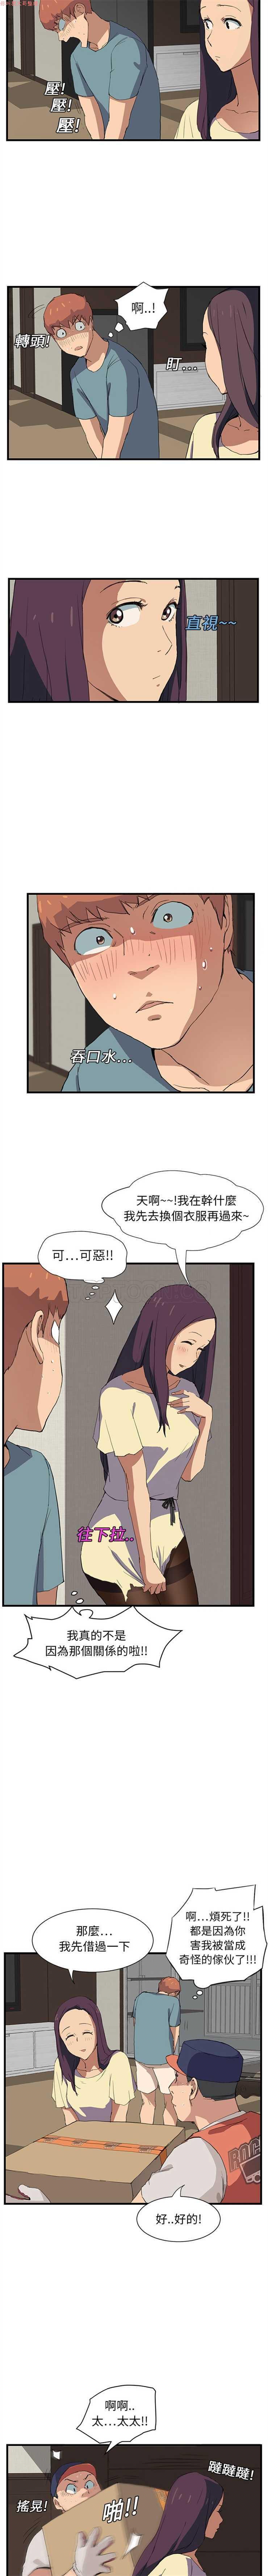 Game 继母 Chinese Spy Camera - Page 11